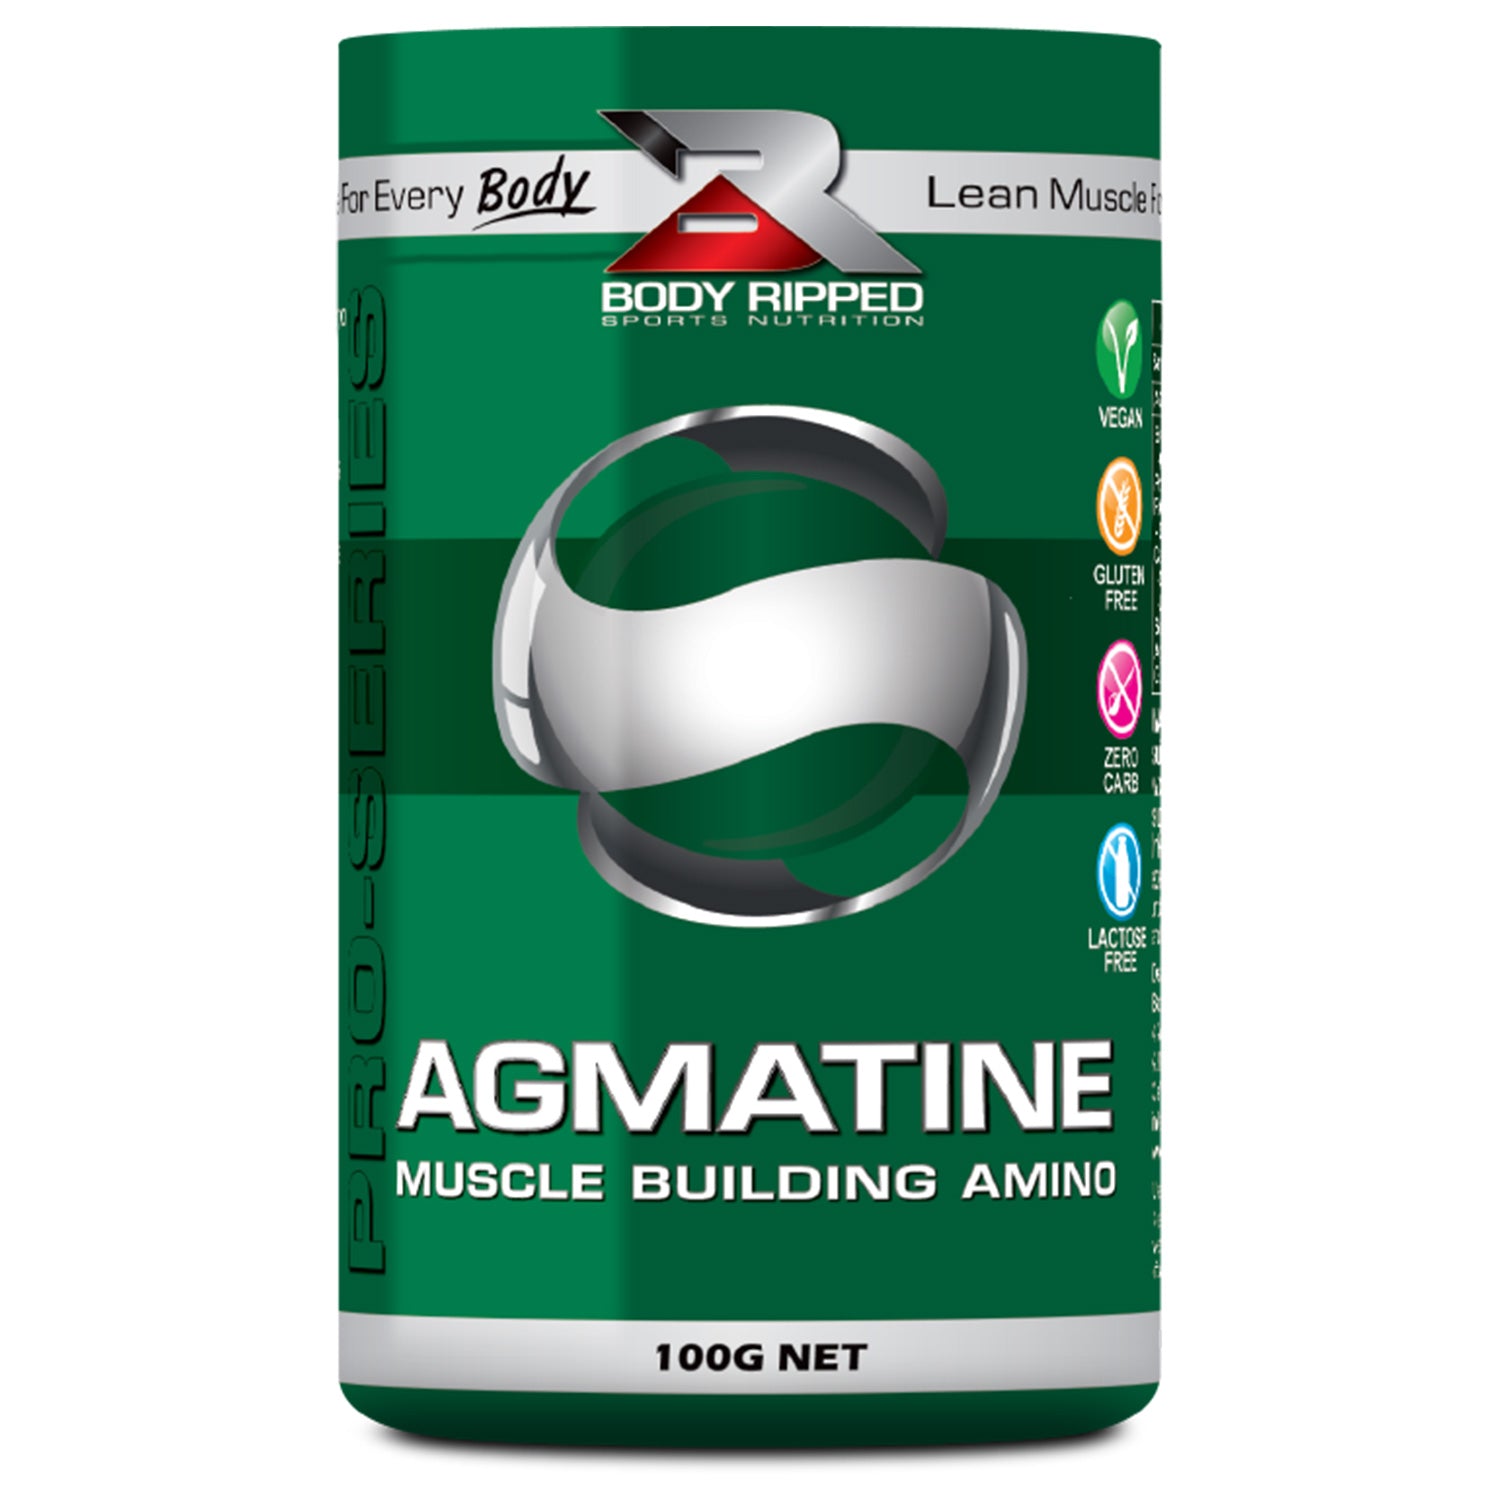 AGMATINE ï»¿- Muscle Building Amino